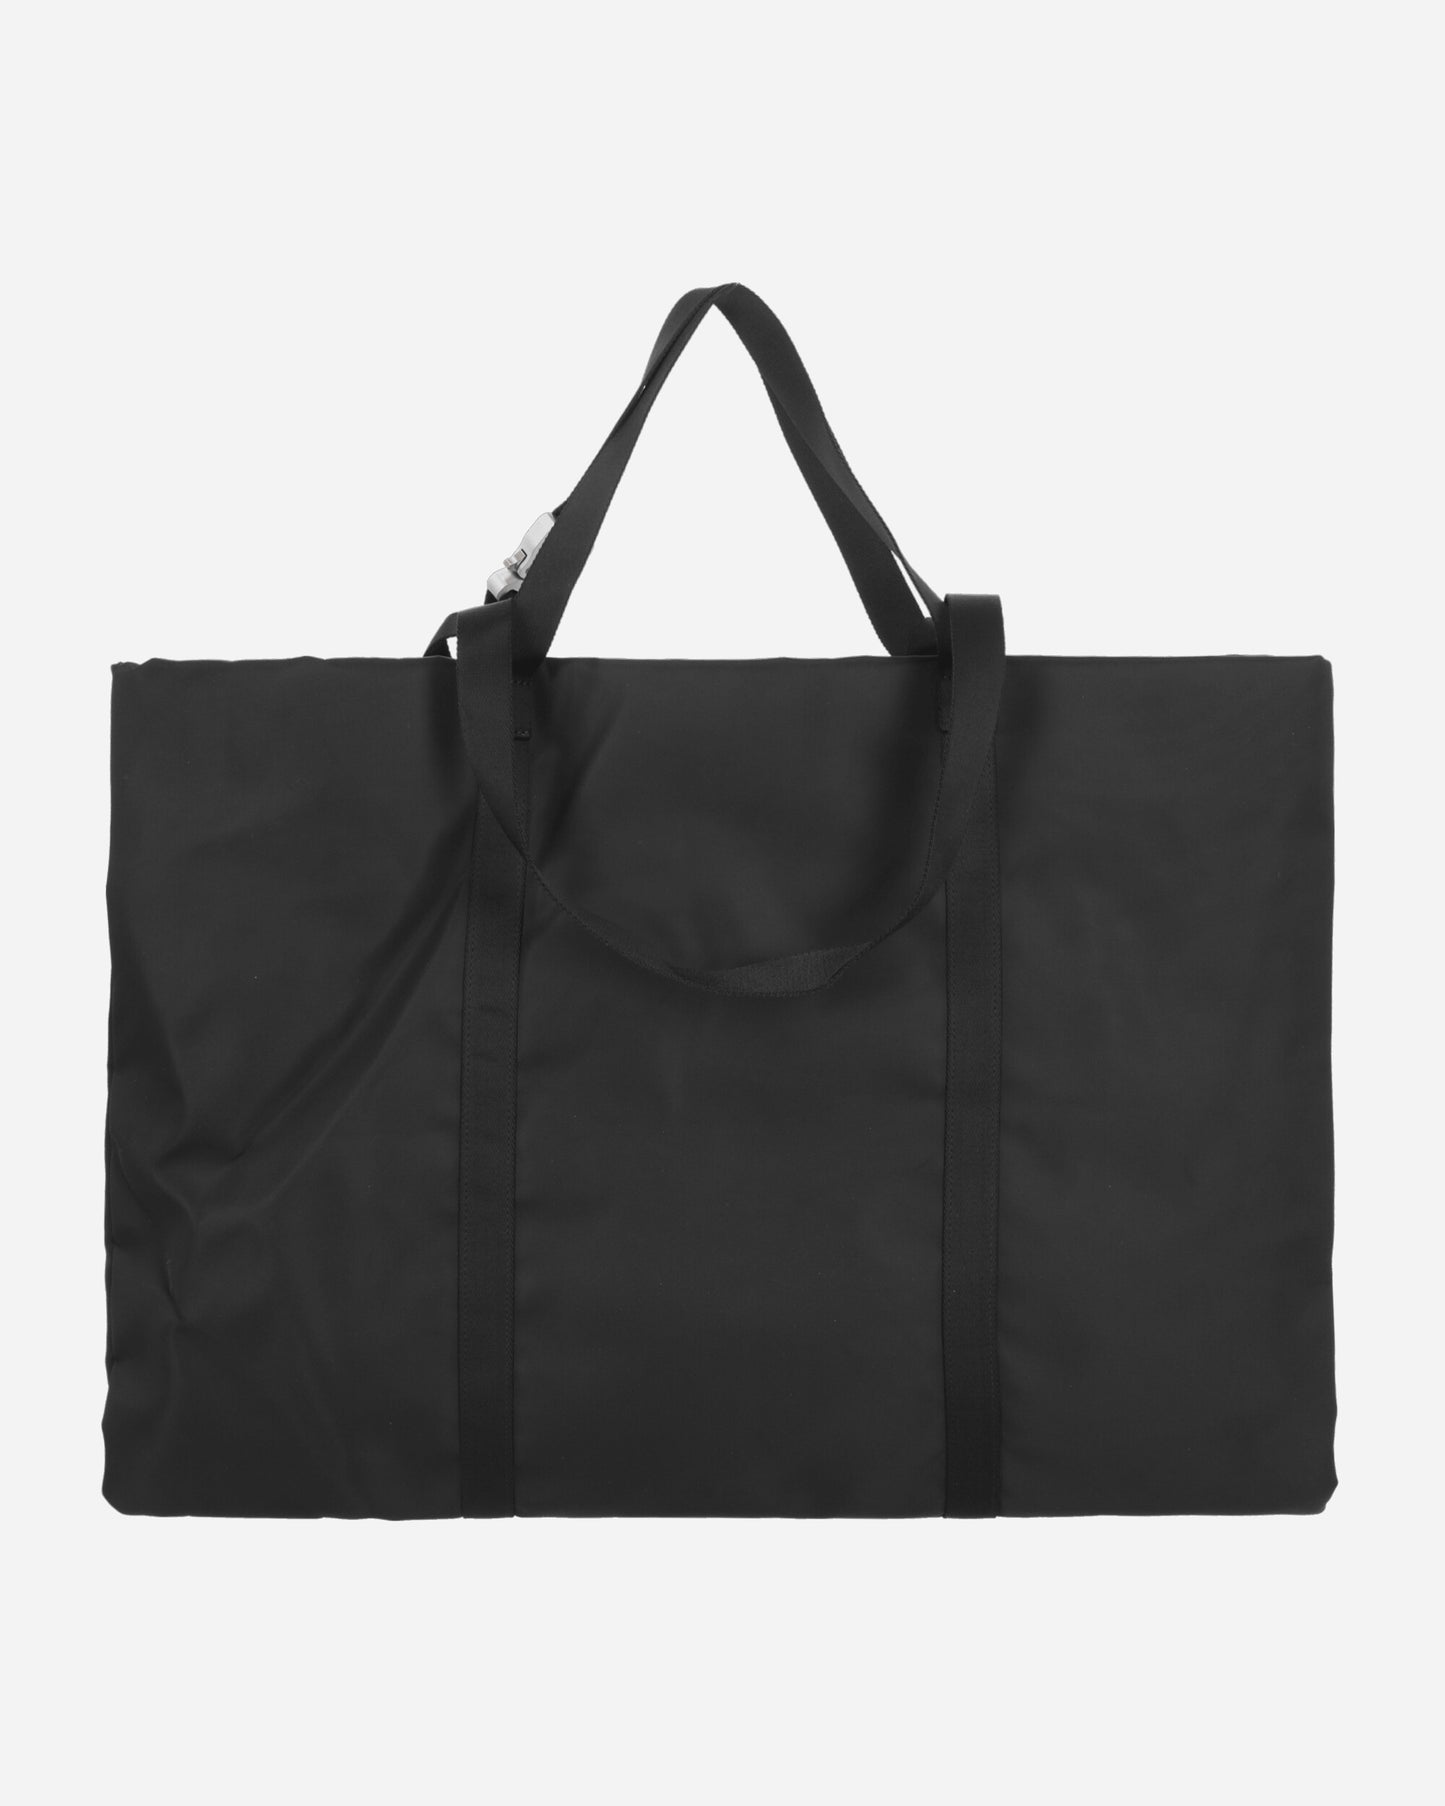 1017 ALYX 9SM Big Puffer Tote Black Bags and Backpacks Tote Bags AAUTB0027FA01 BLK0002